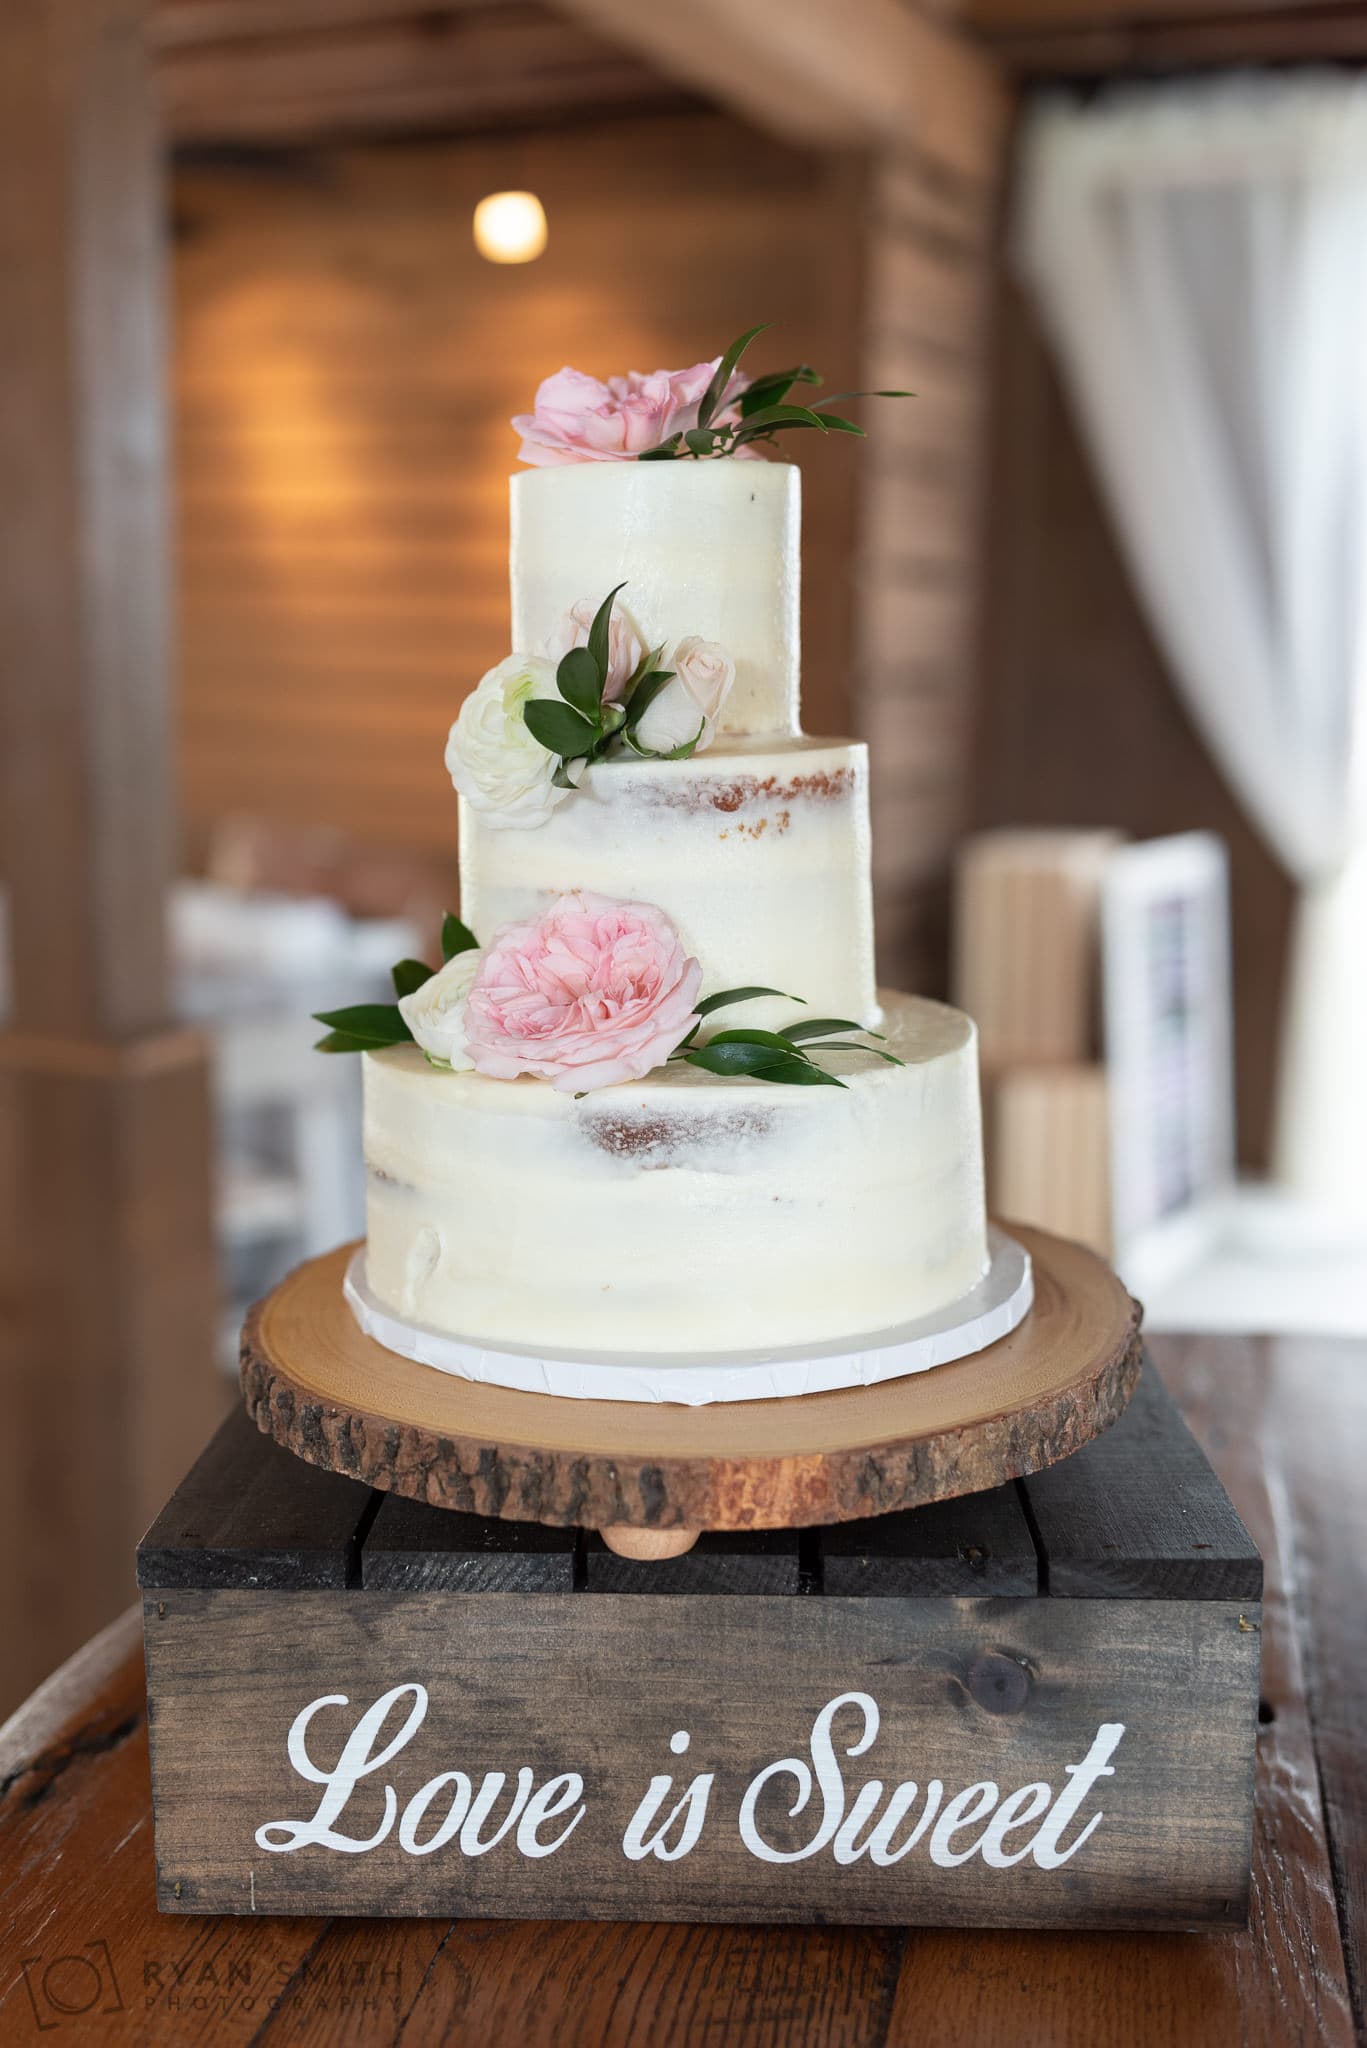 Love is sweet cake details - Wildhorse at Parker Farms